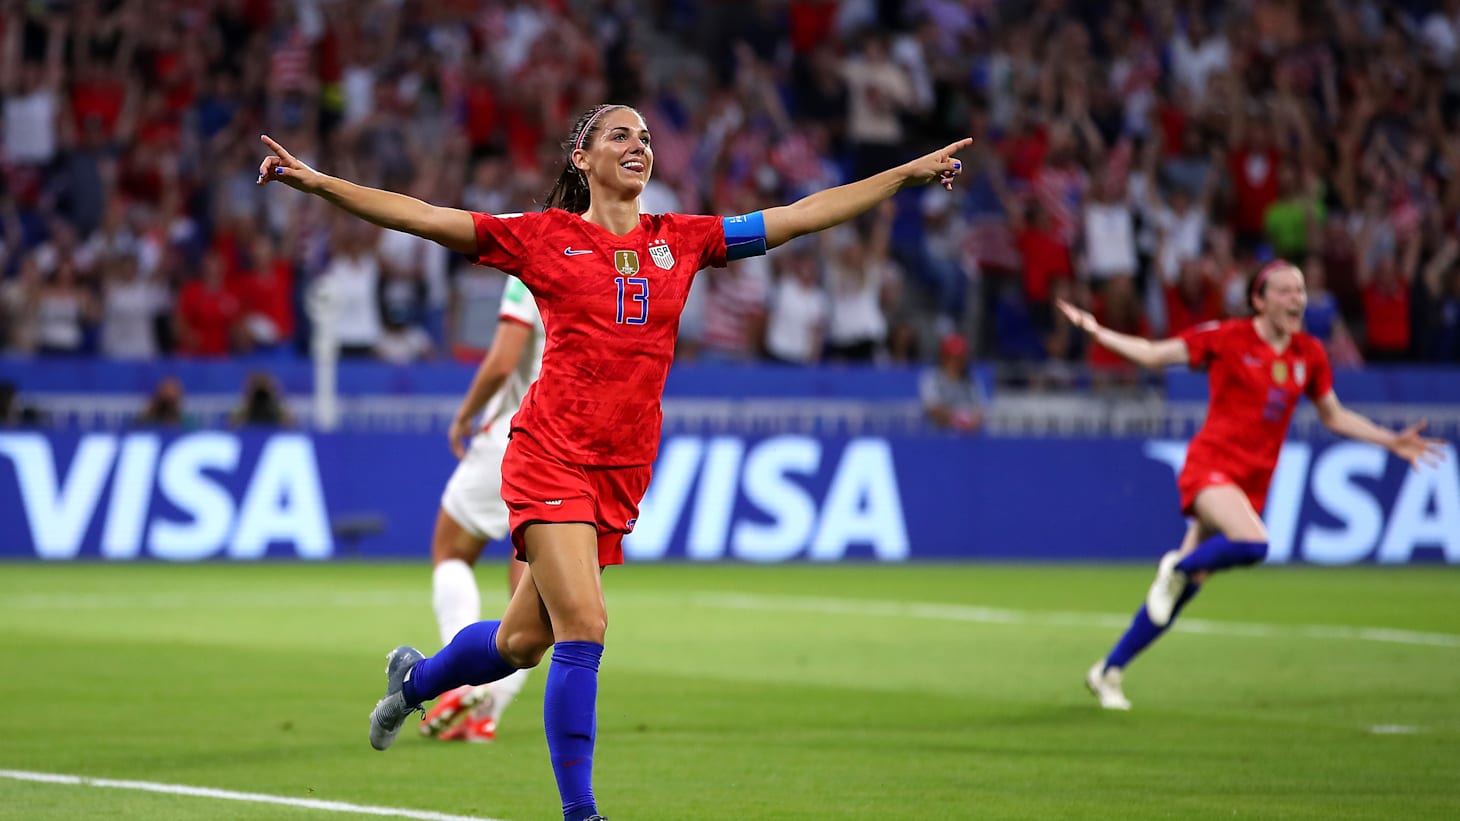 The top 11 womens football players to follow on social media